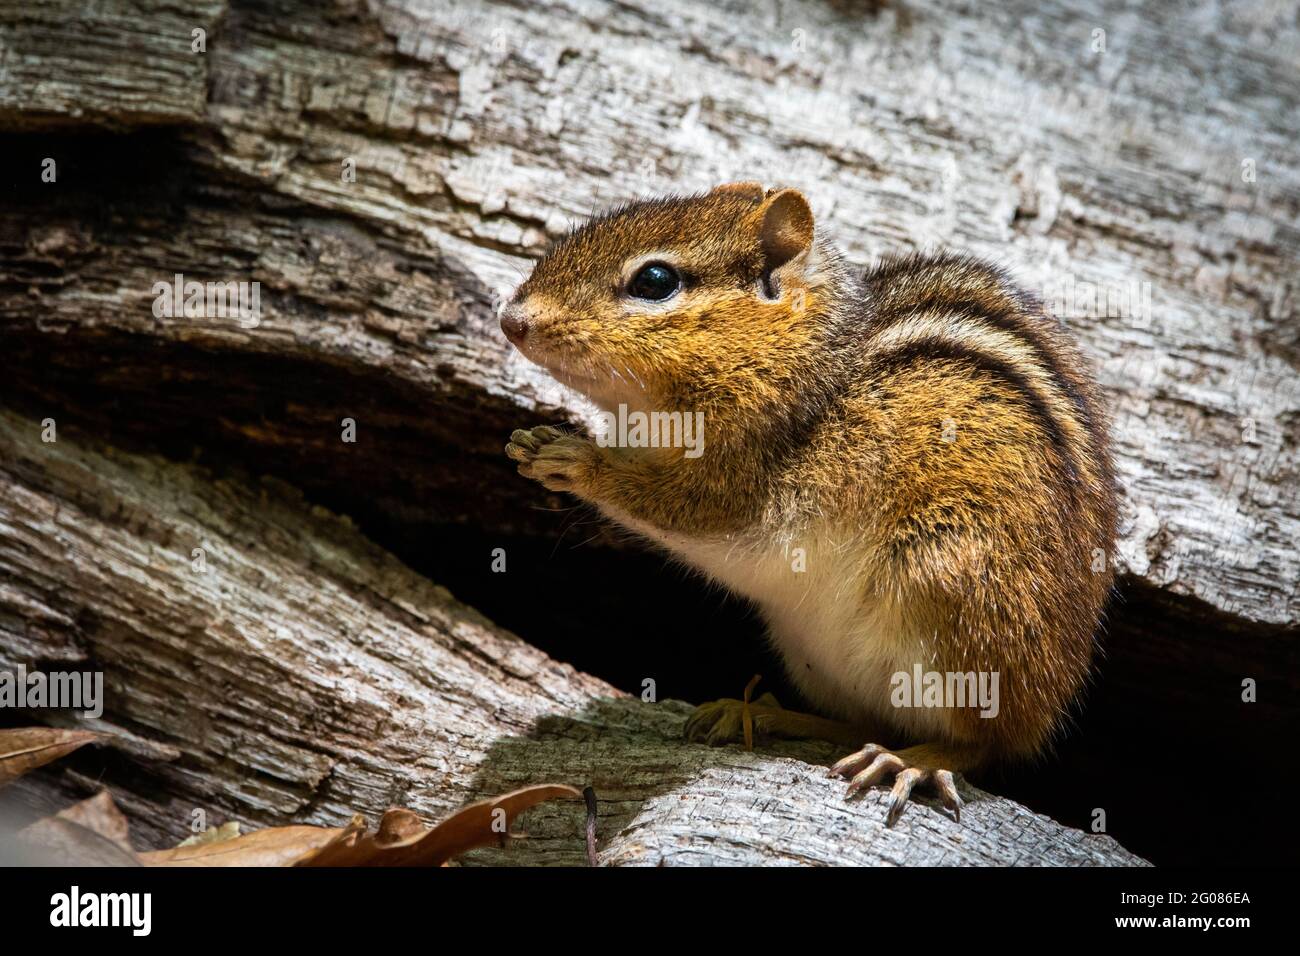 Cute and curious chipmunk eating leafs close up in the tree Stock Photo